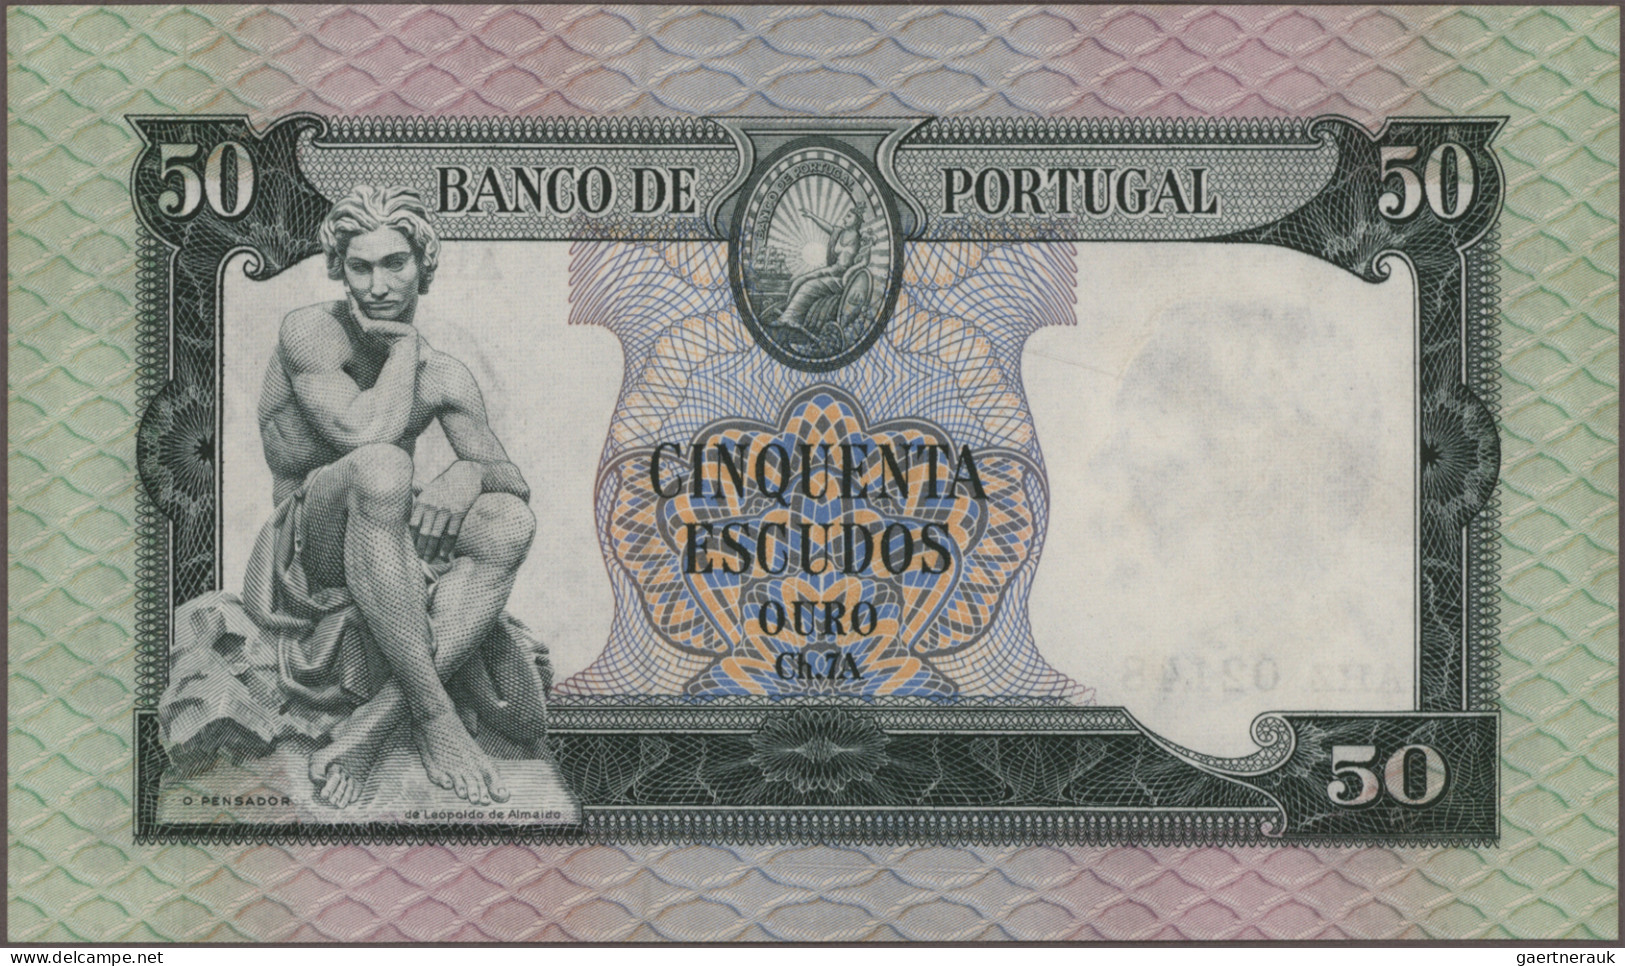 Portugal: Banco de Portugal, set with 4 banknotes, series 1960/61, with 20, 50,